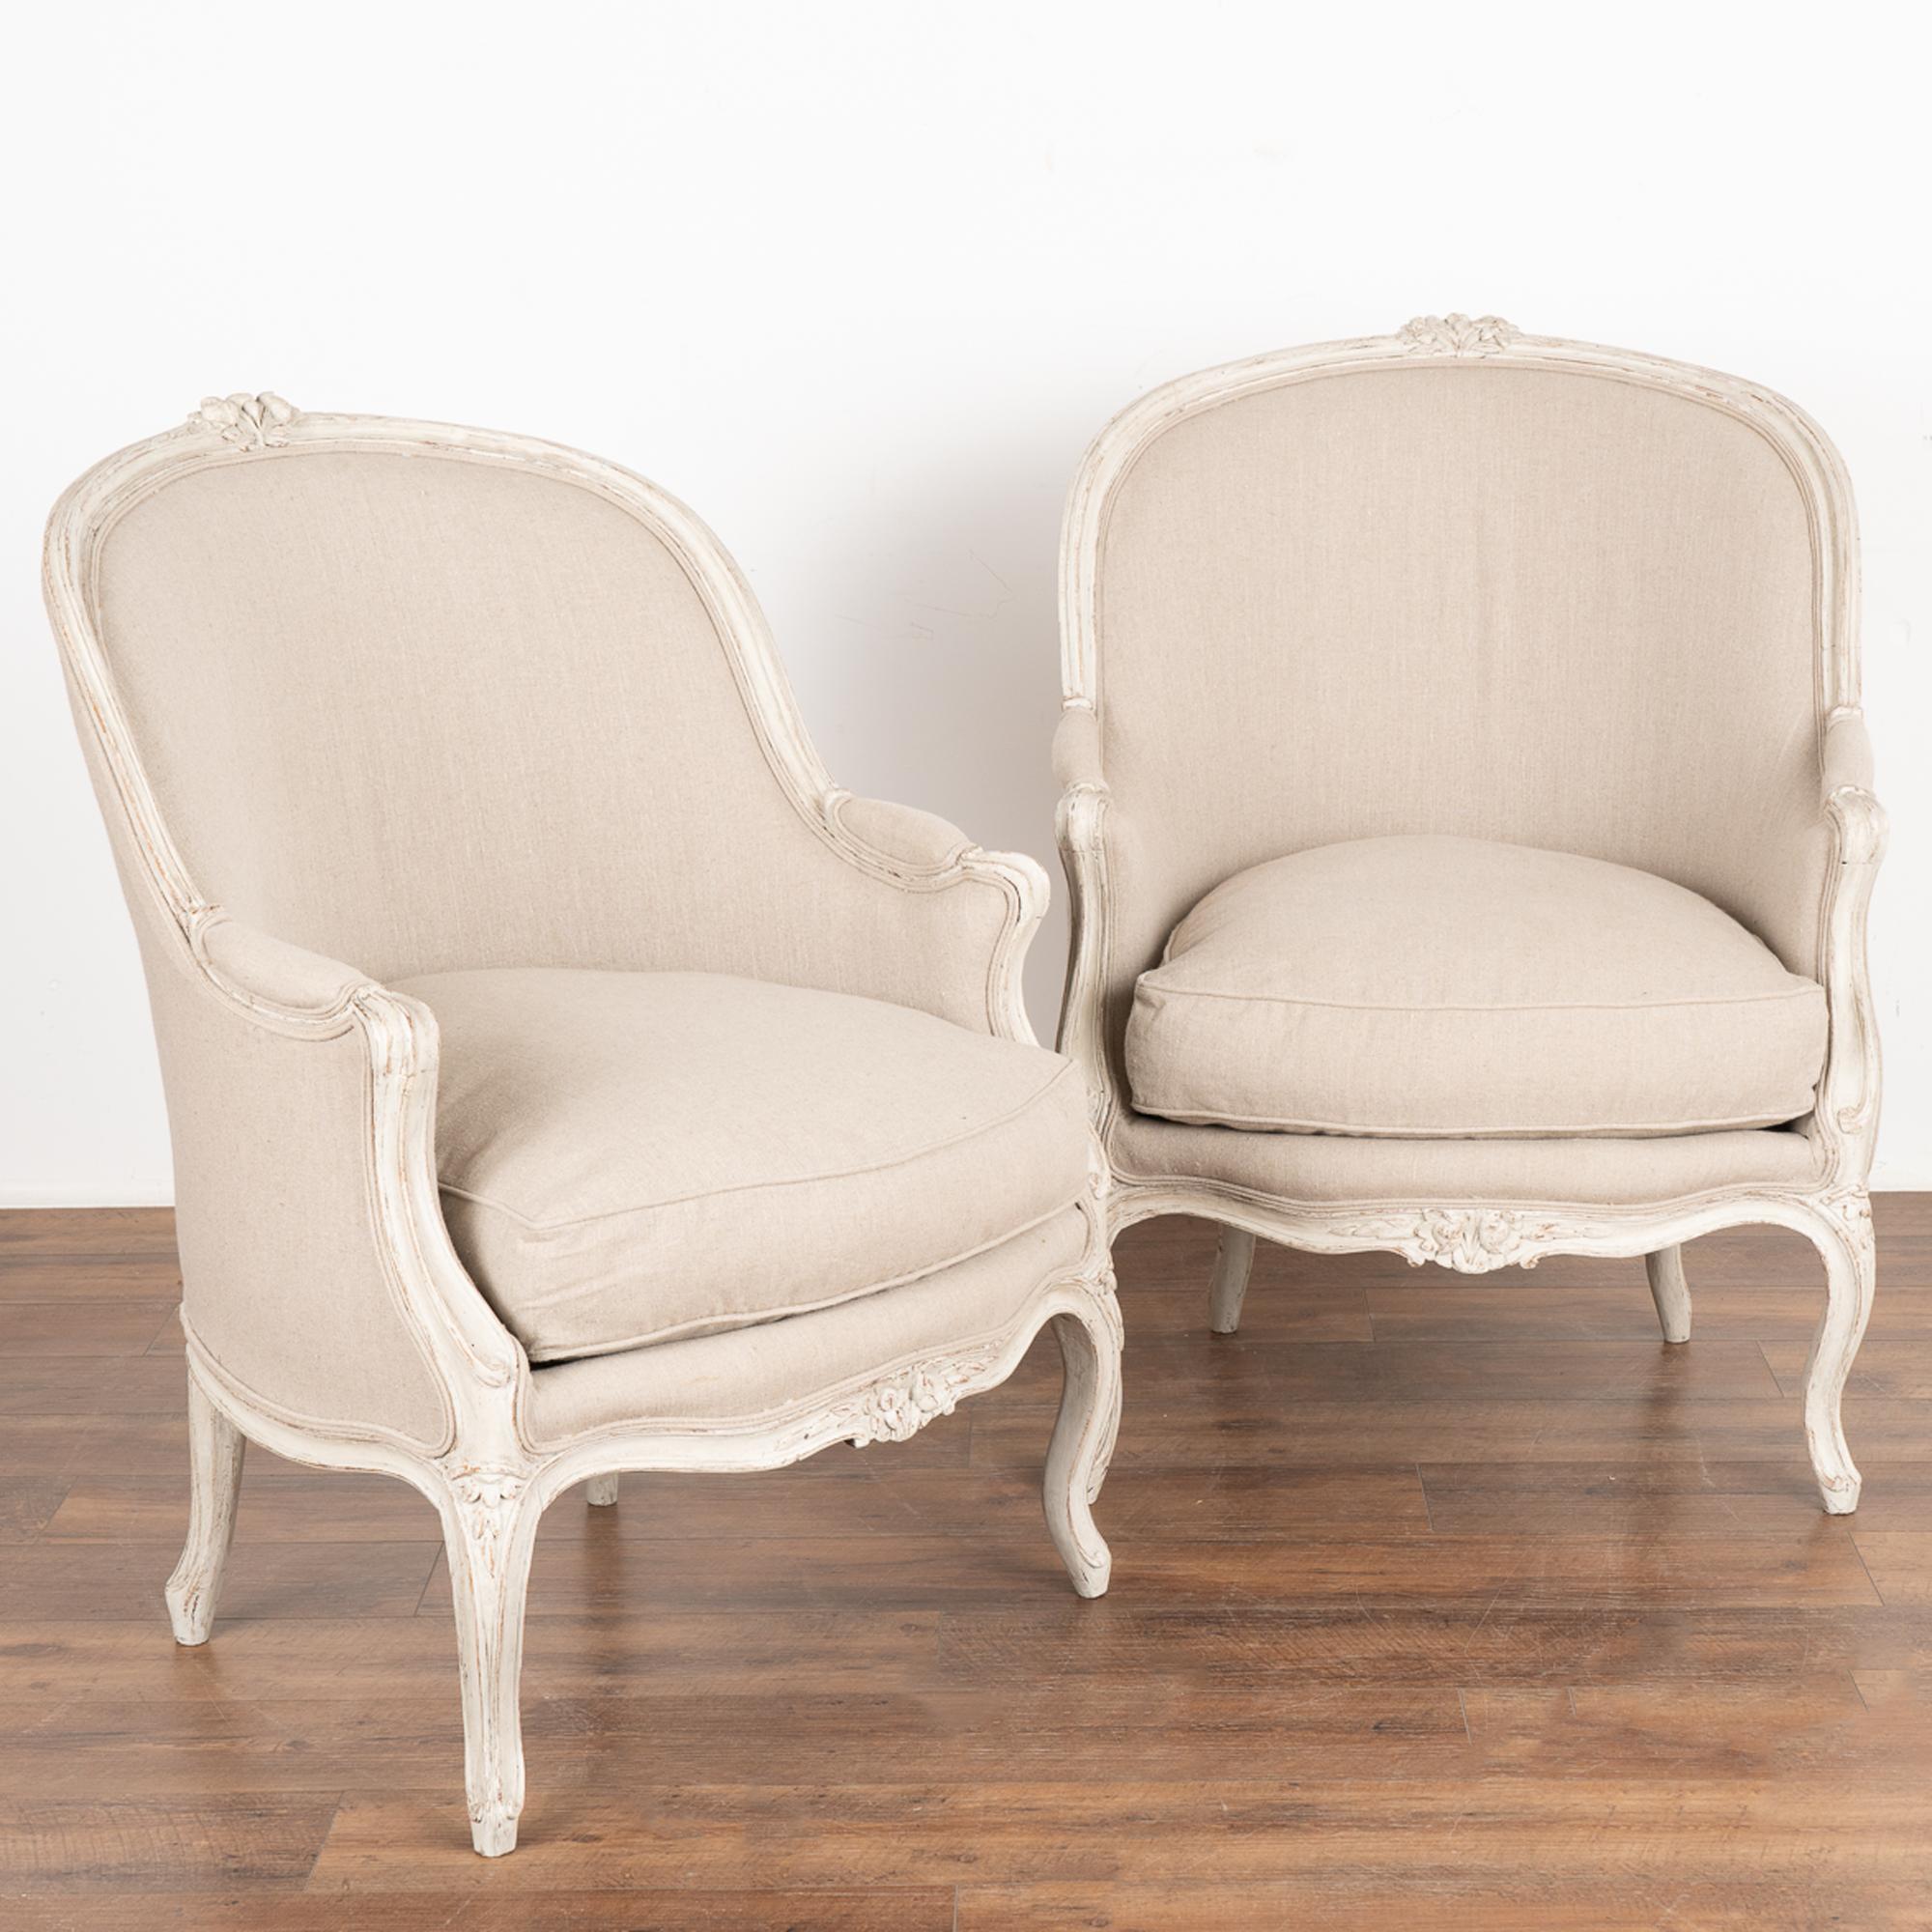 Pair, attractive Swedish country Gustavian arm chairs with gently curved barrel back and carved flowers adorning the  back and skirt.
Newer, professionally applied layered white painted finish has been lightly distressed, adding to the grace of